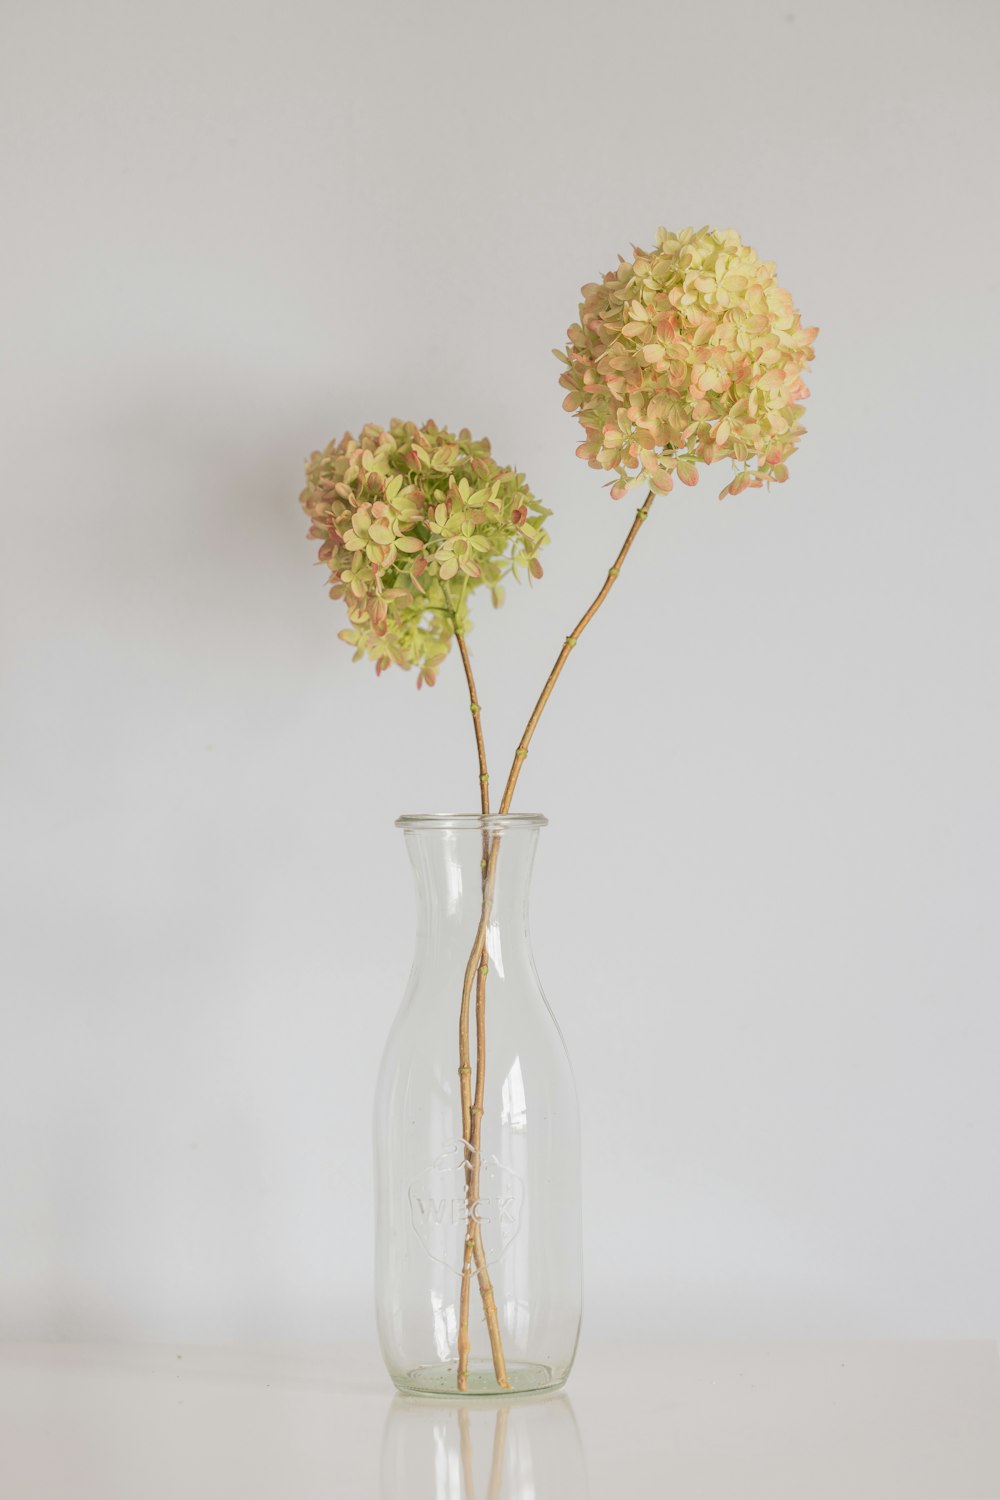 a vase with yellow flowers